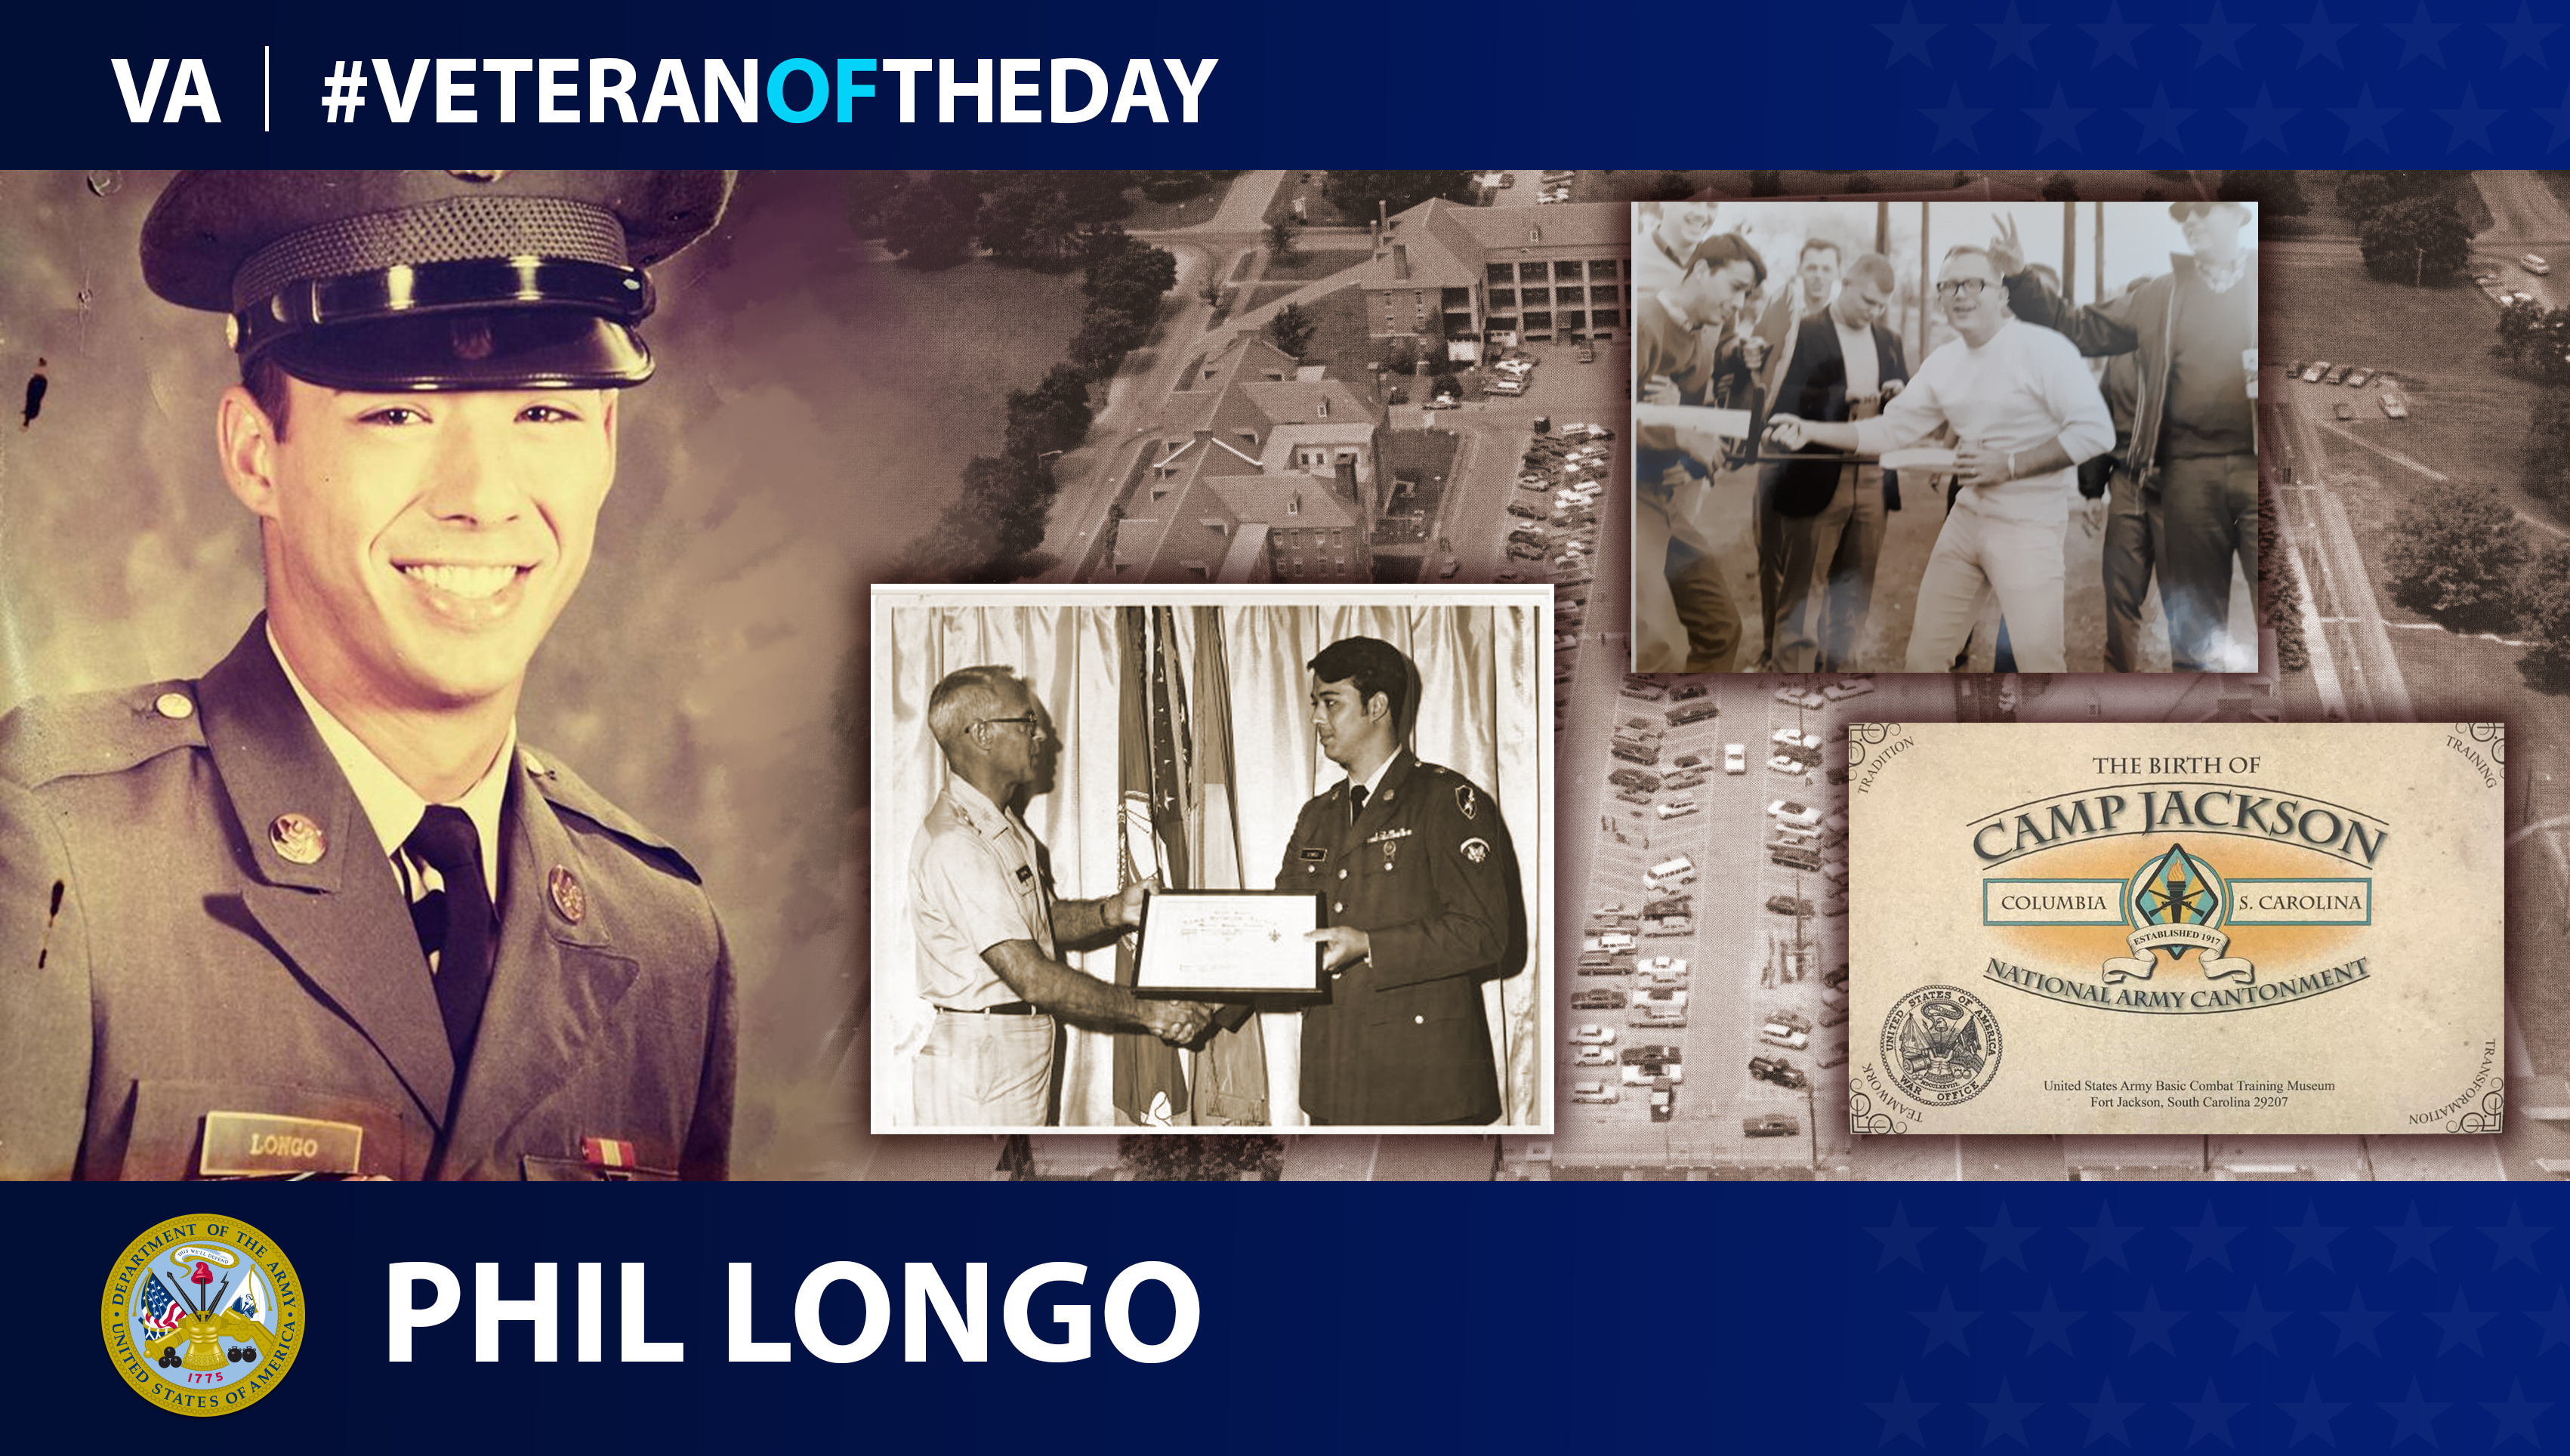 Army Veteran Phil Longo is today's Veteran of the day.